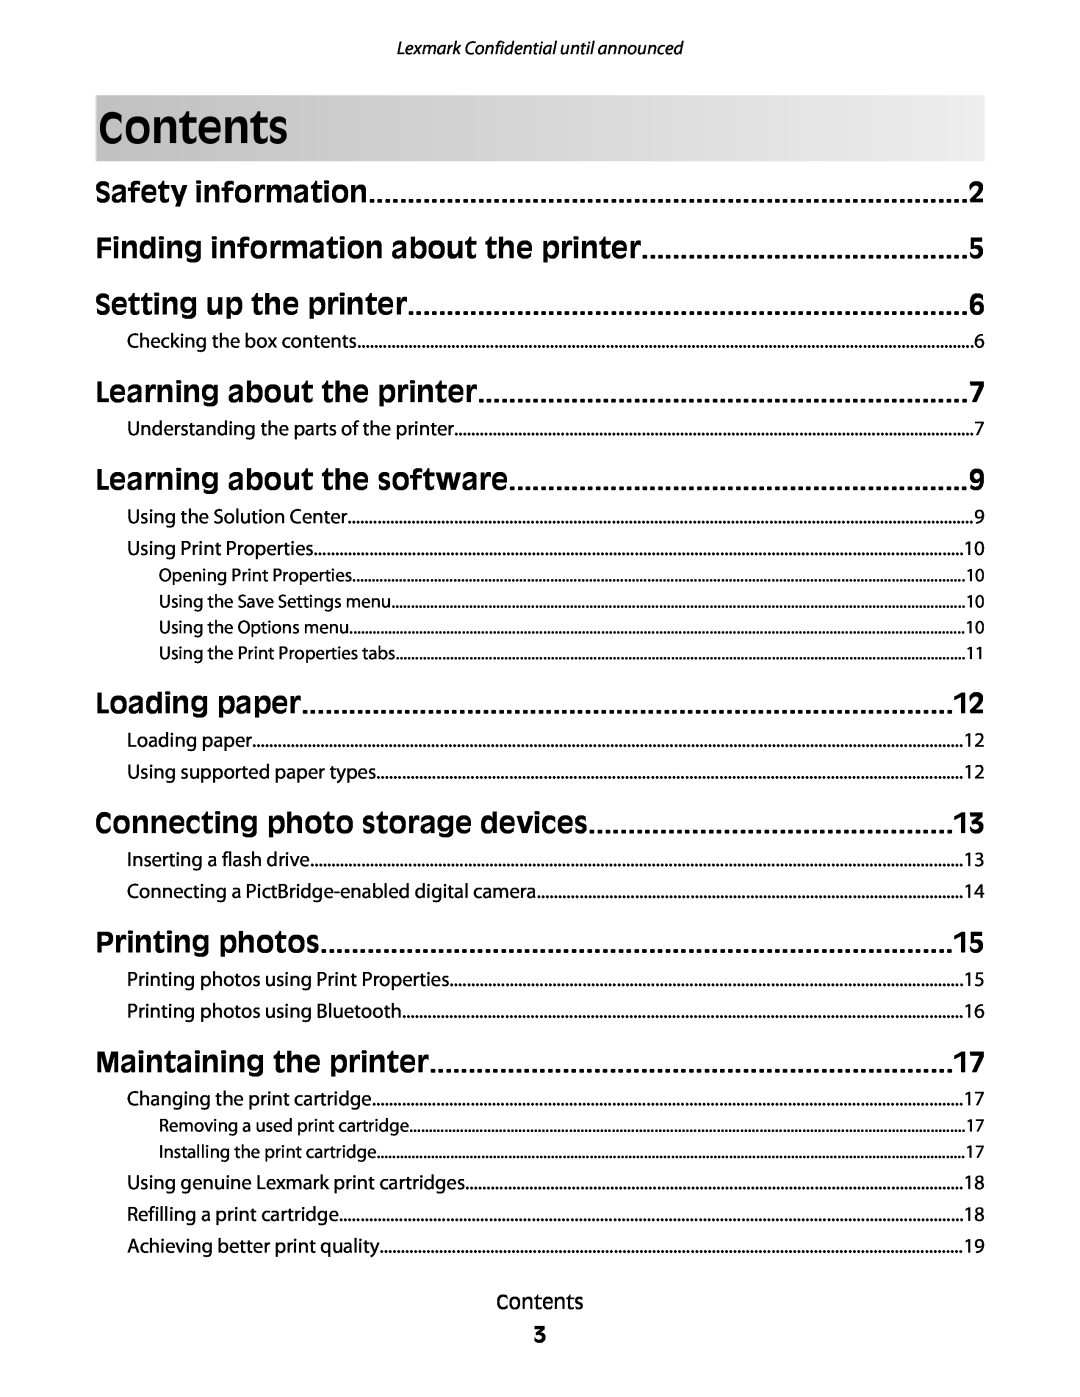 Lexmark P200 Contents, Safety information, Finding information about the printer, Setting up the printer, Loading paper 